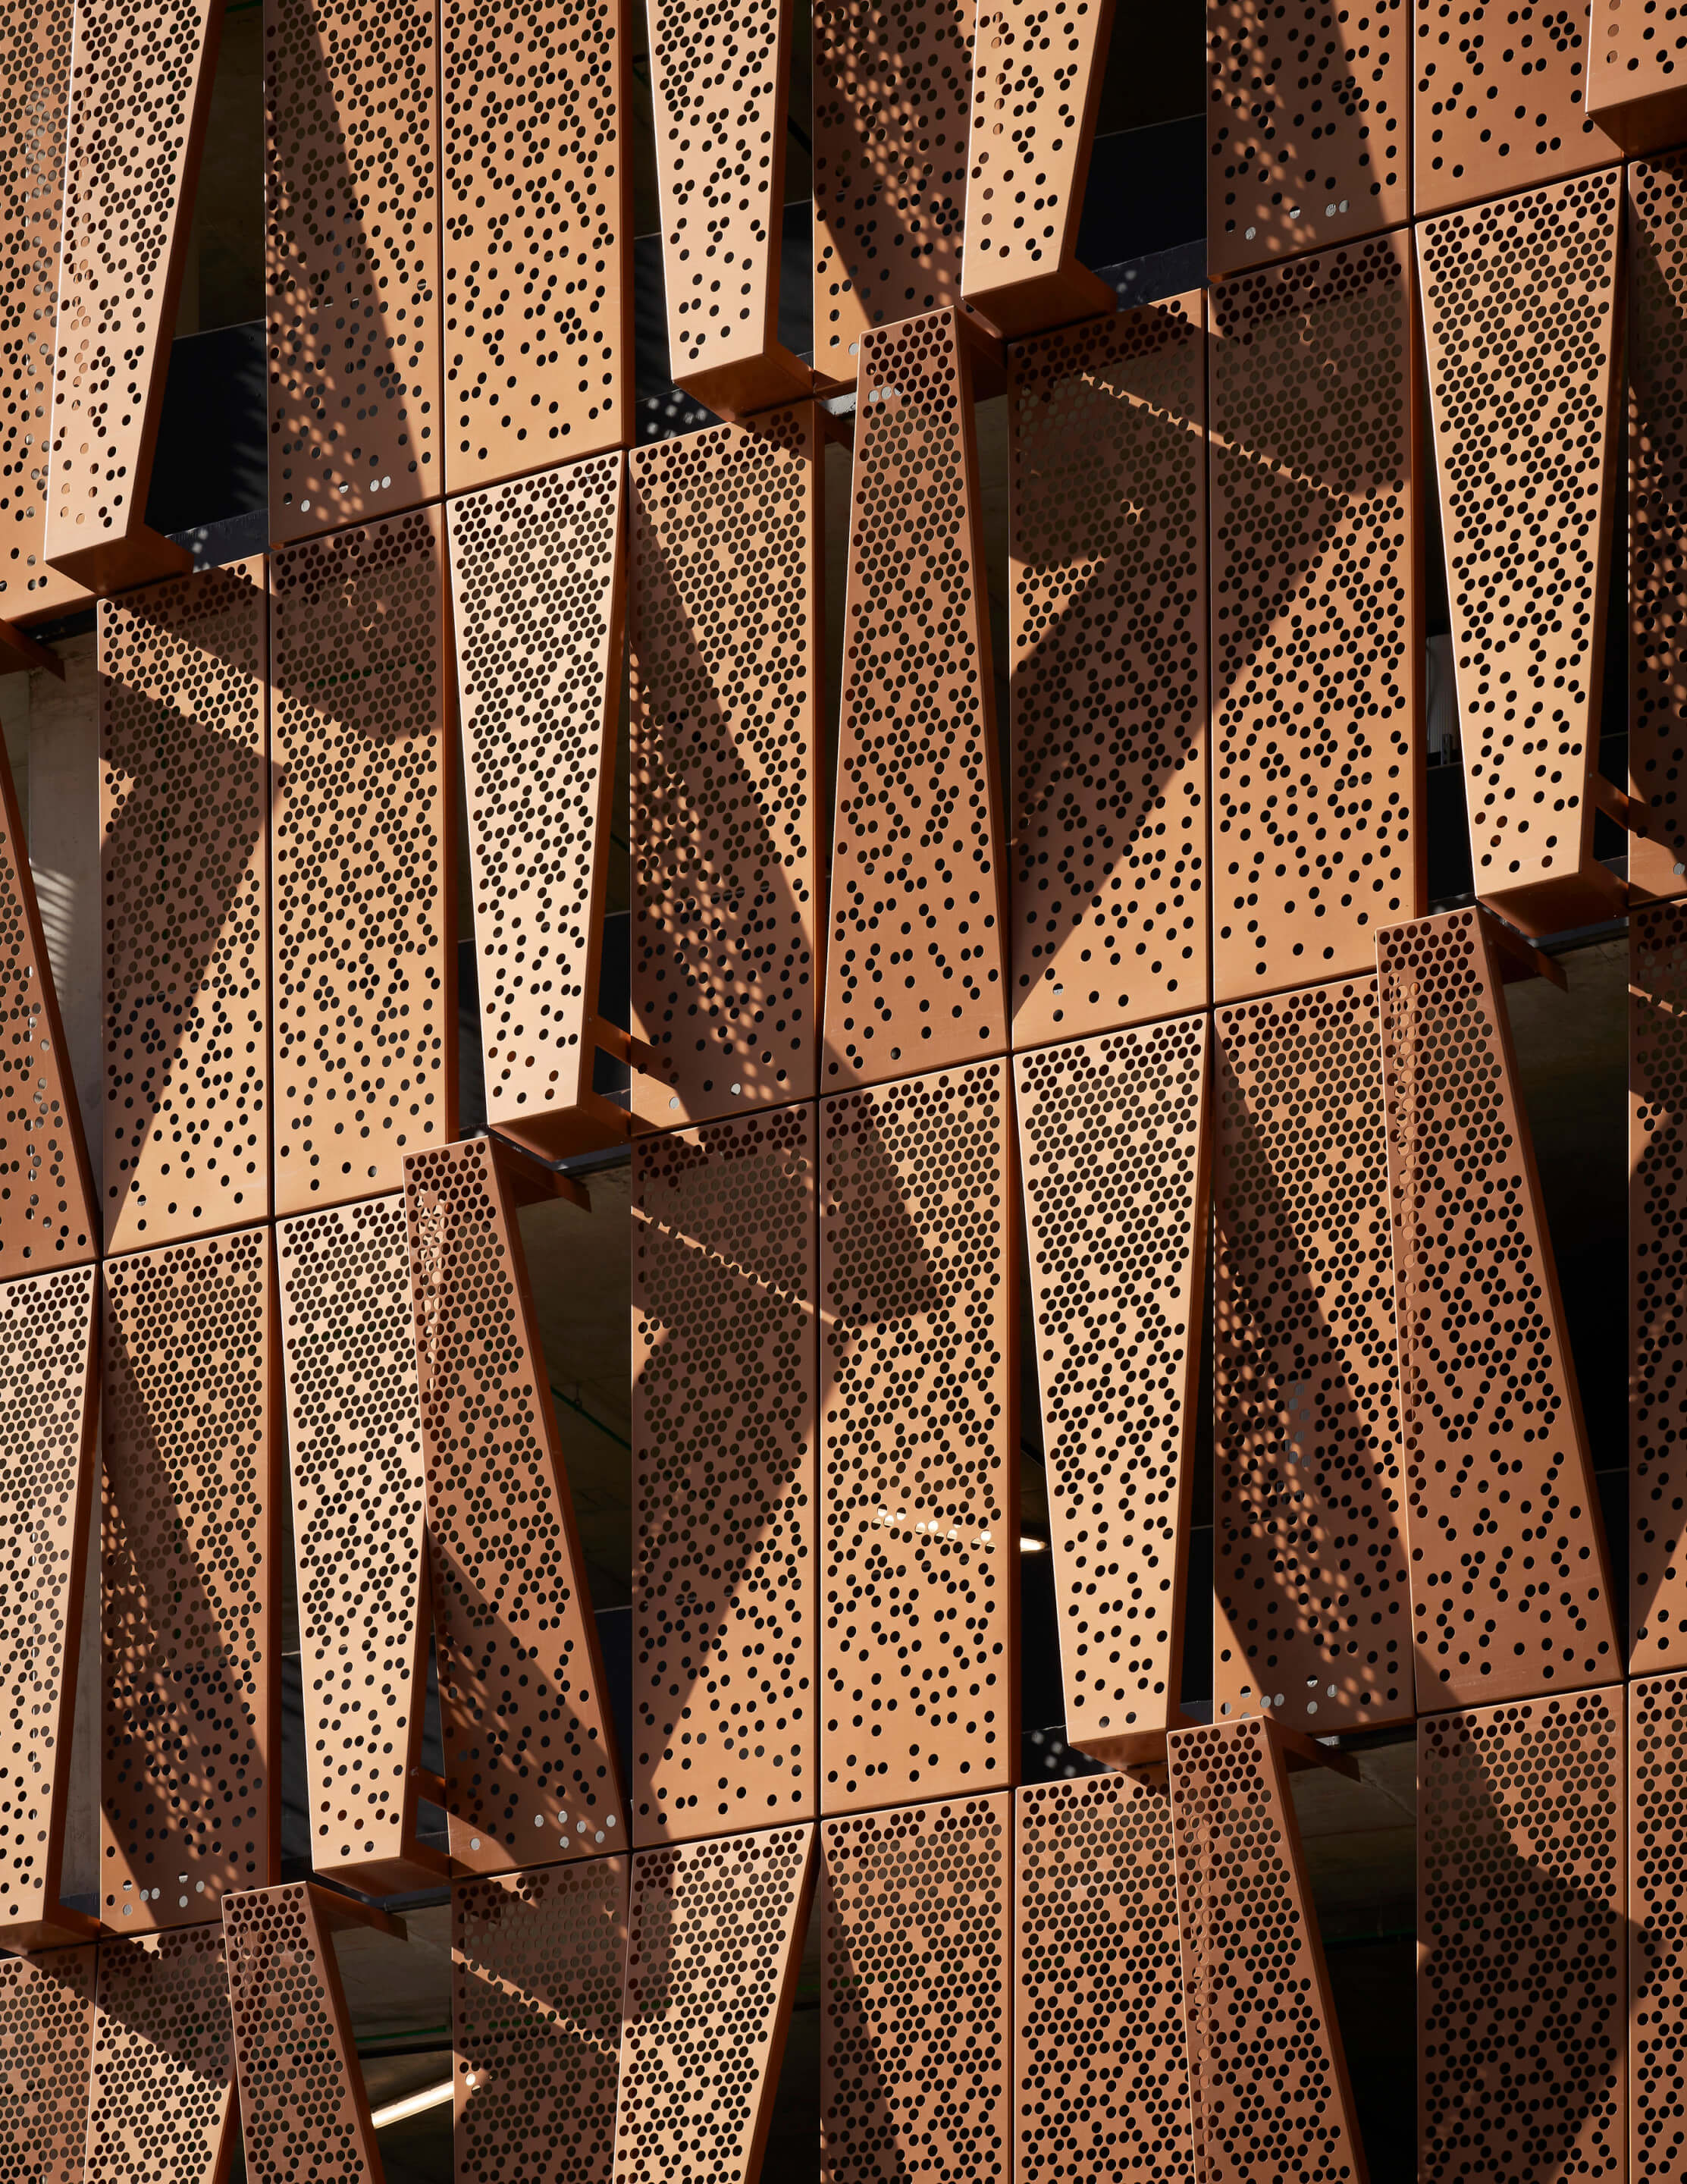 Perforated copper-colored panels with varying hole thicknesses